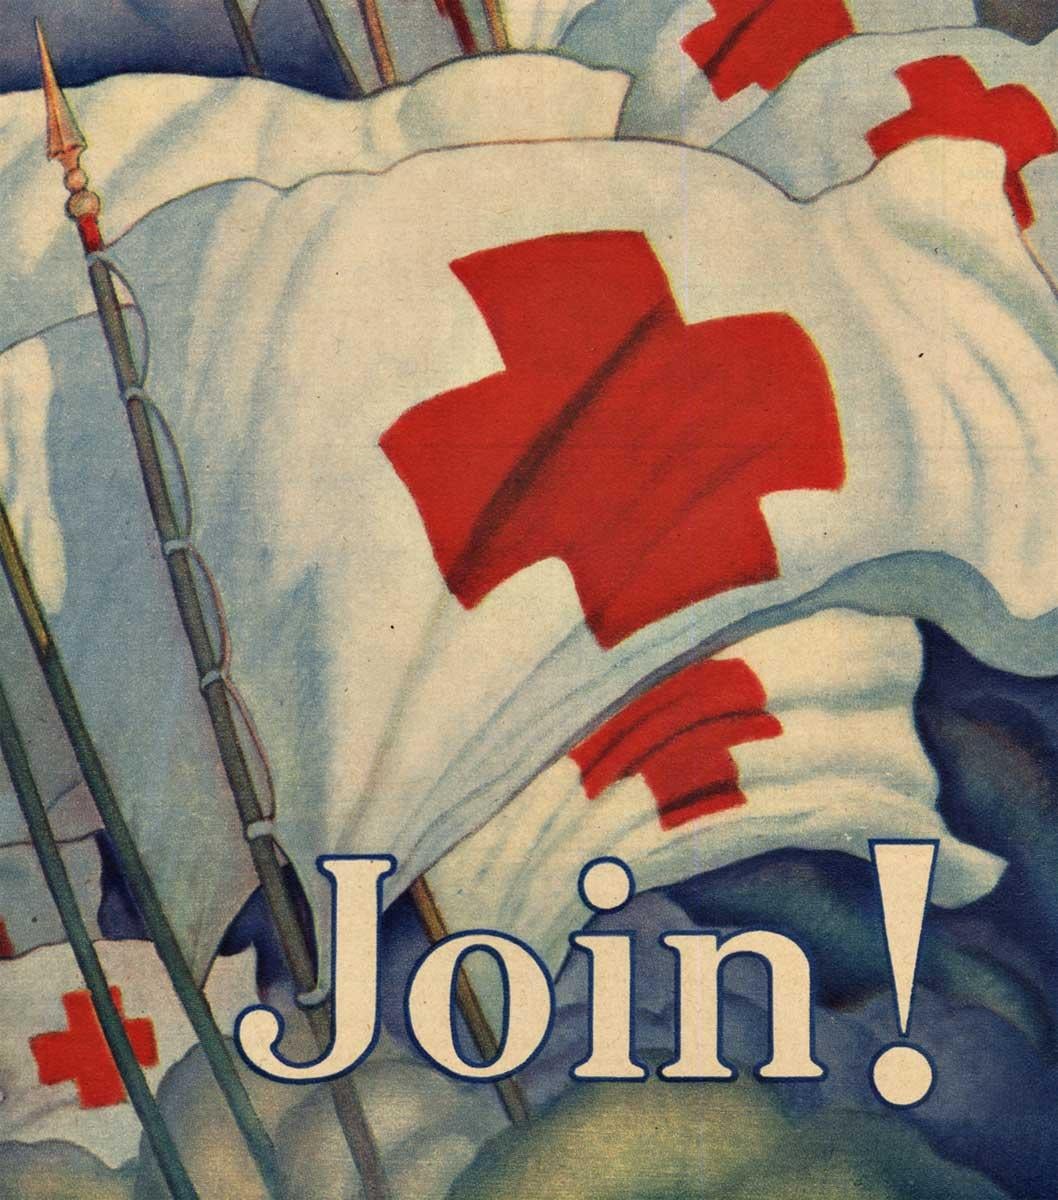 Join! The American Red Cross Carries on - American Modern Print by Newell Convers Wyeth